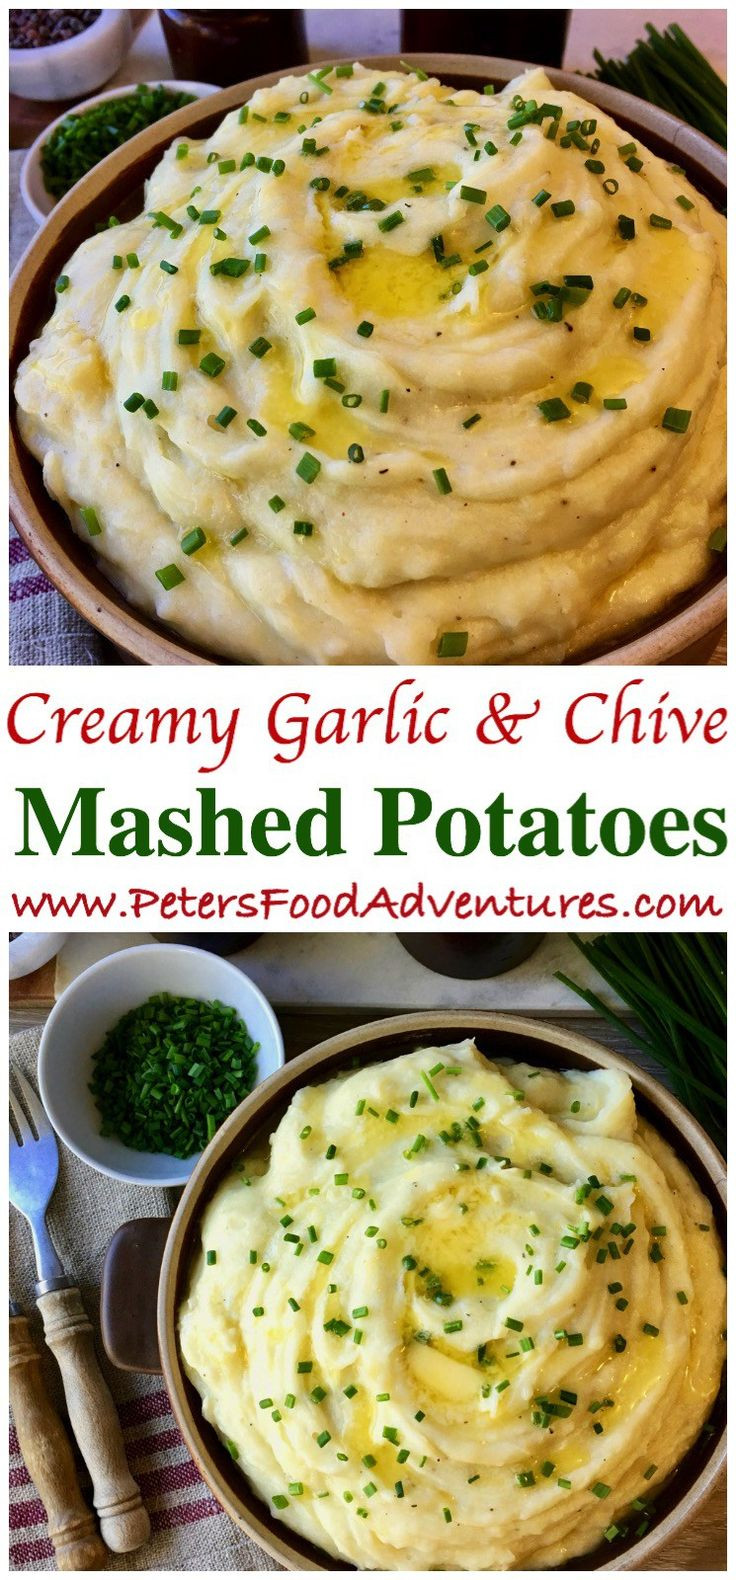 Best Thanksgiving Mashed Potatoes Recipe
 Best 25 Thanksgiving recipes ideas on Pinterest